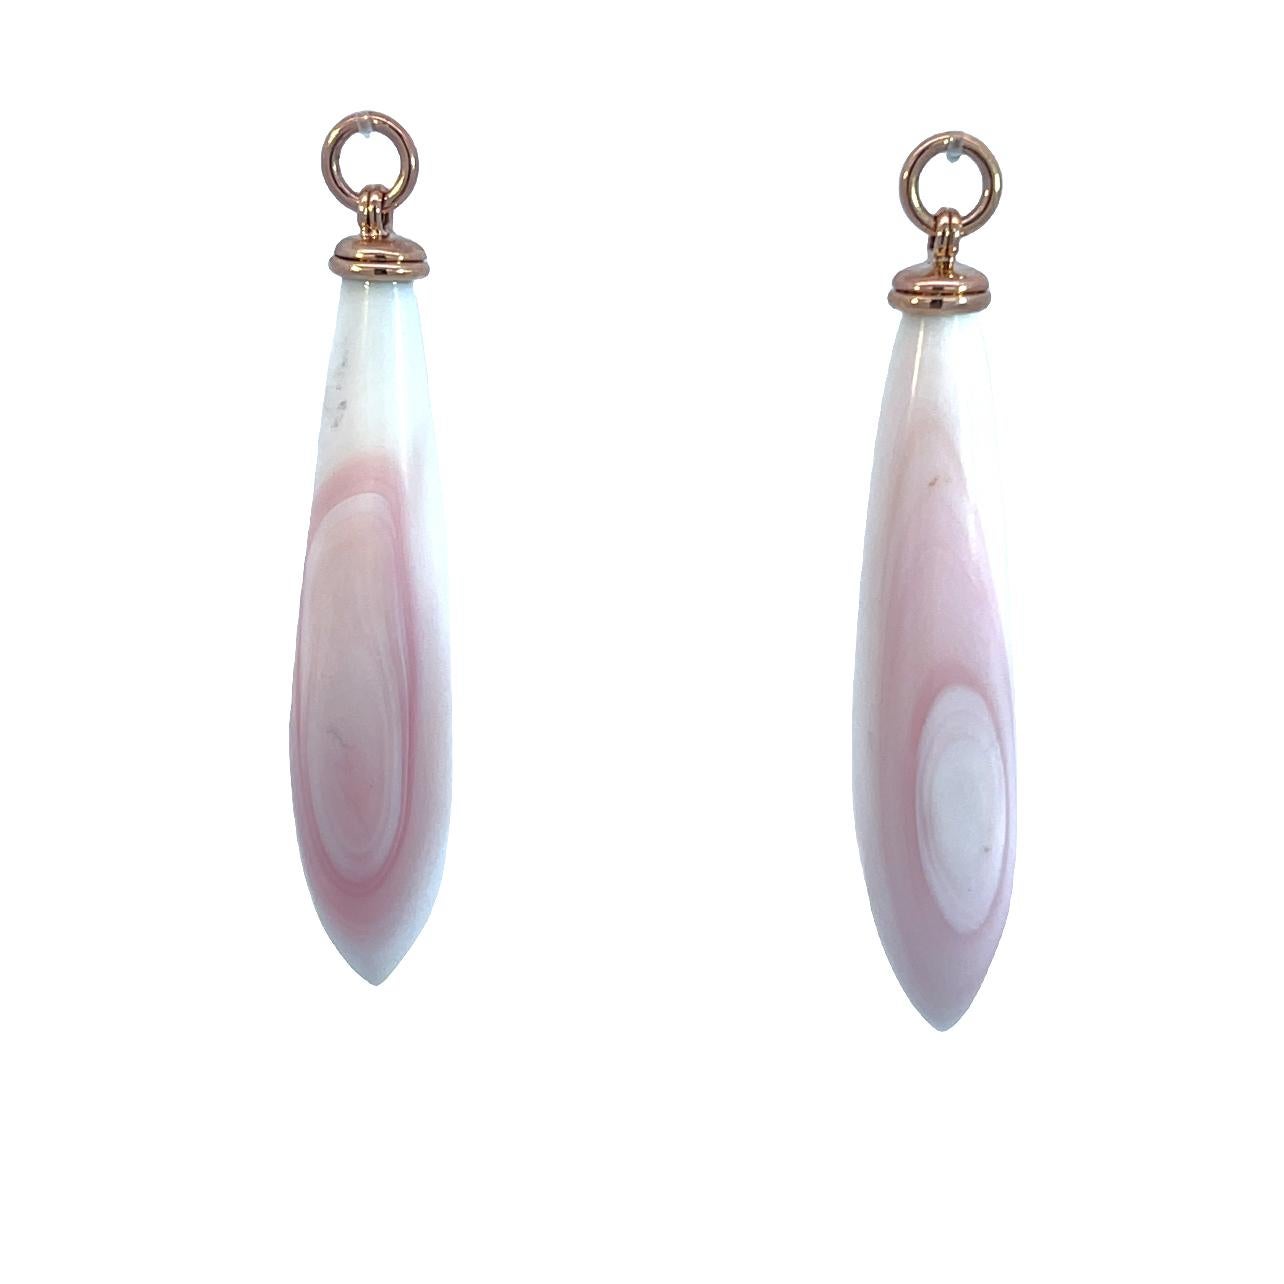 A pair of 18k white gold 8mm white South Sea pearl studs with a pair of removable 18k Rose Gold 